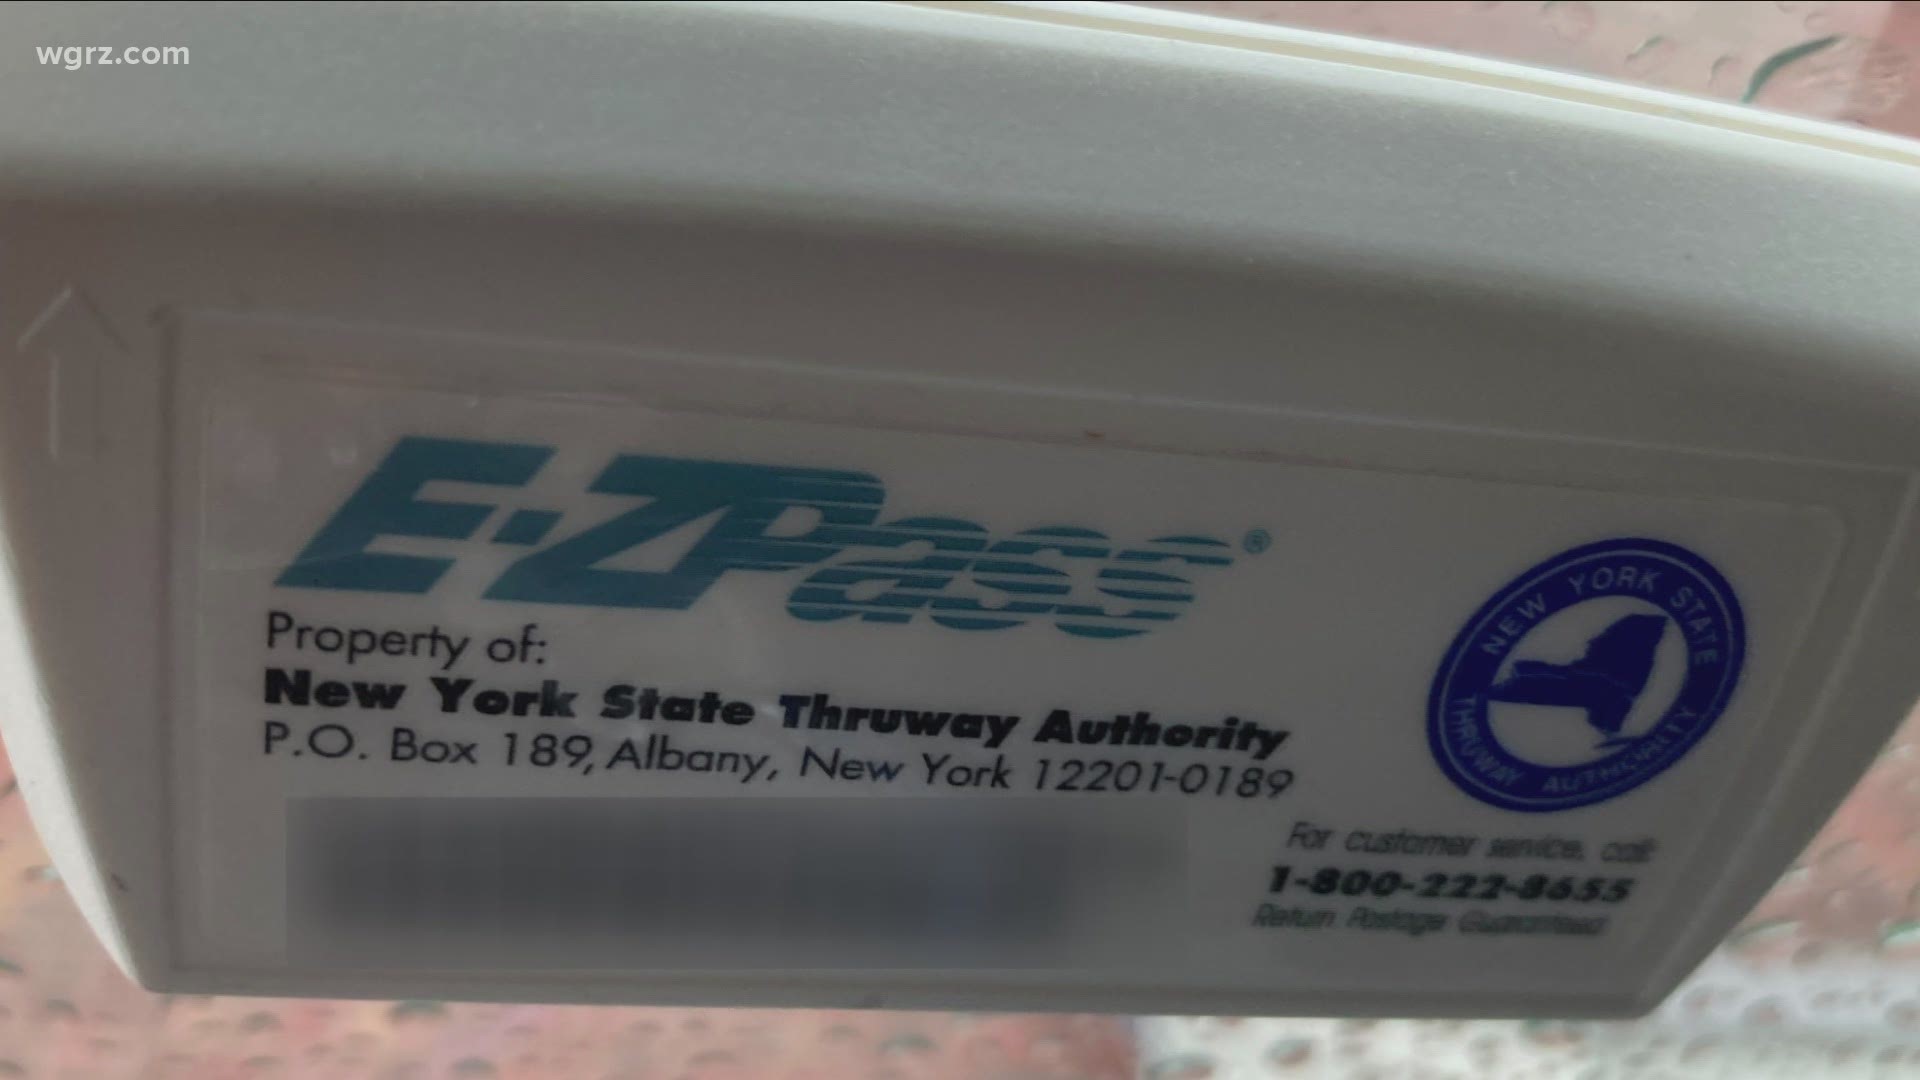 Similar problems existed in 2018 with E-ZPass vendors.